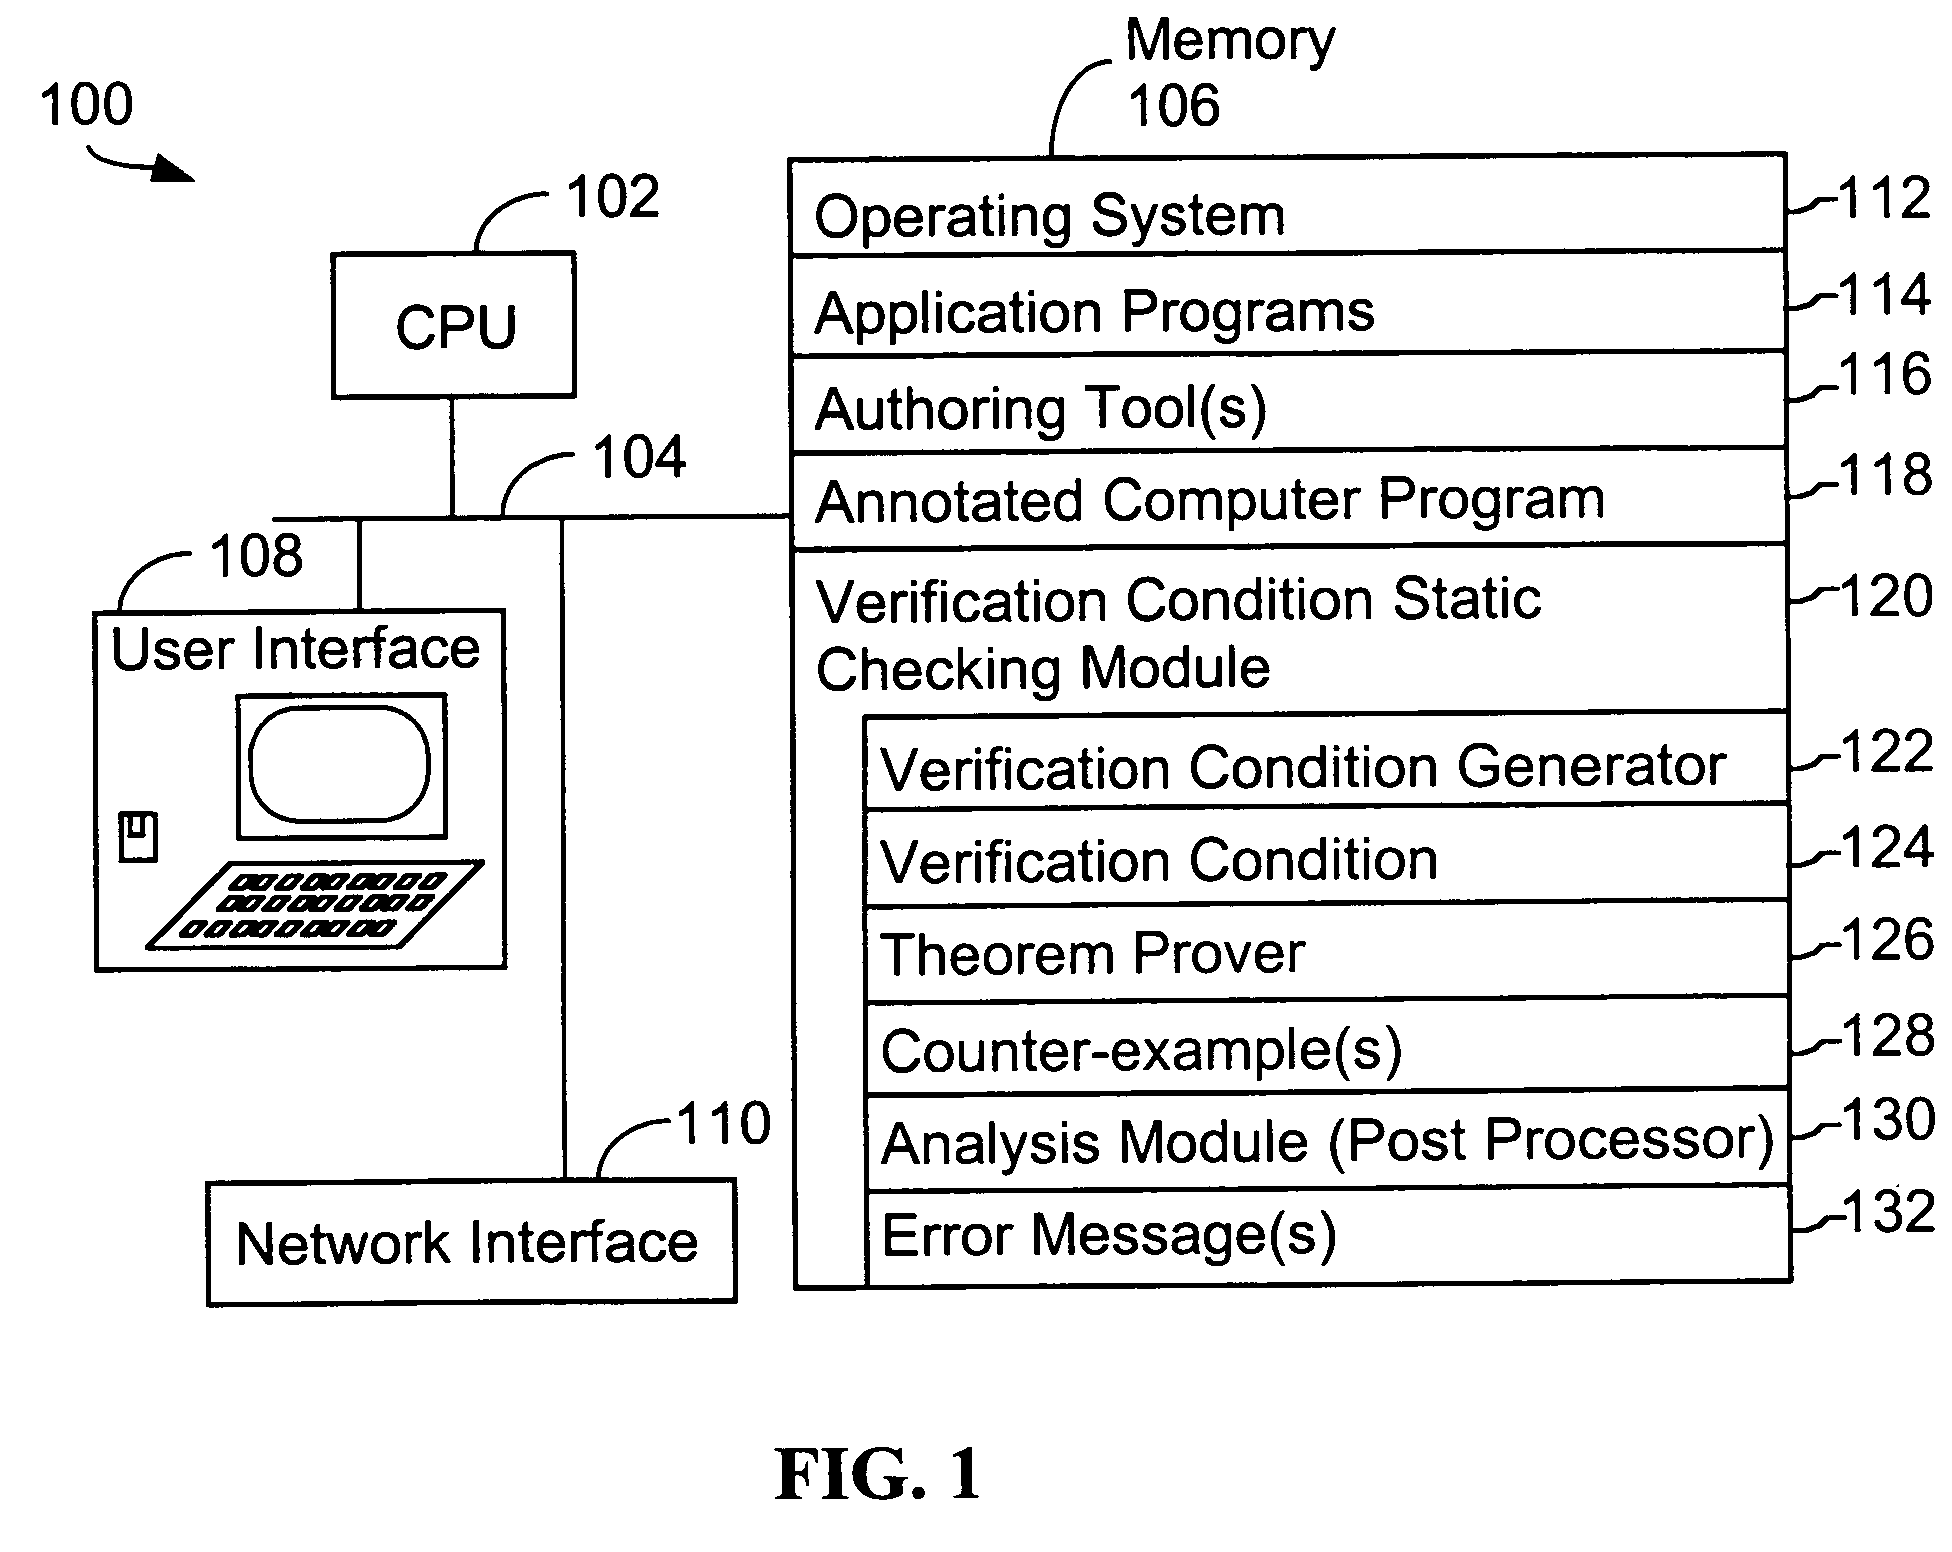 System and method for verifying computer program correctness and providing recoverable execution trace information